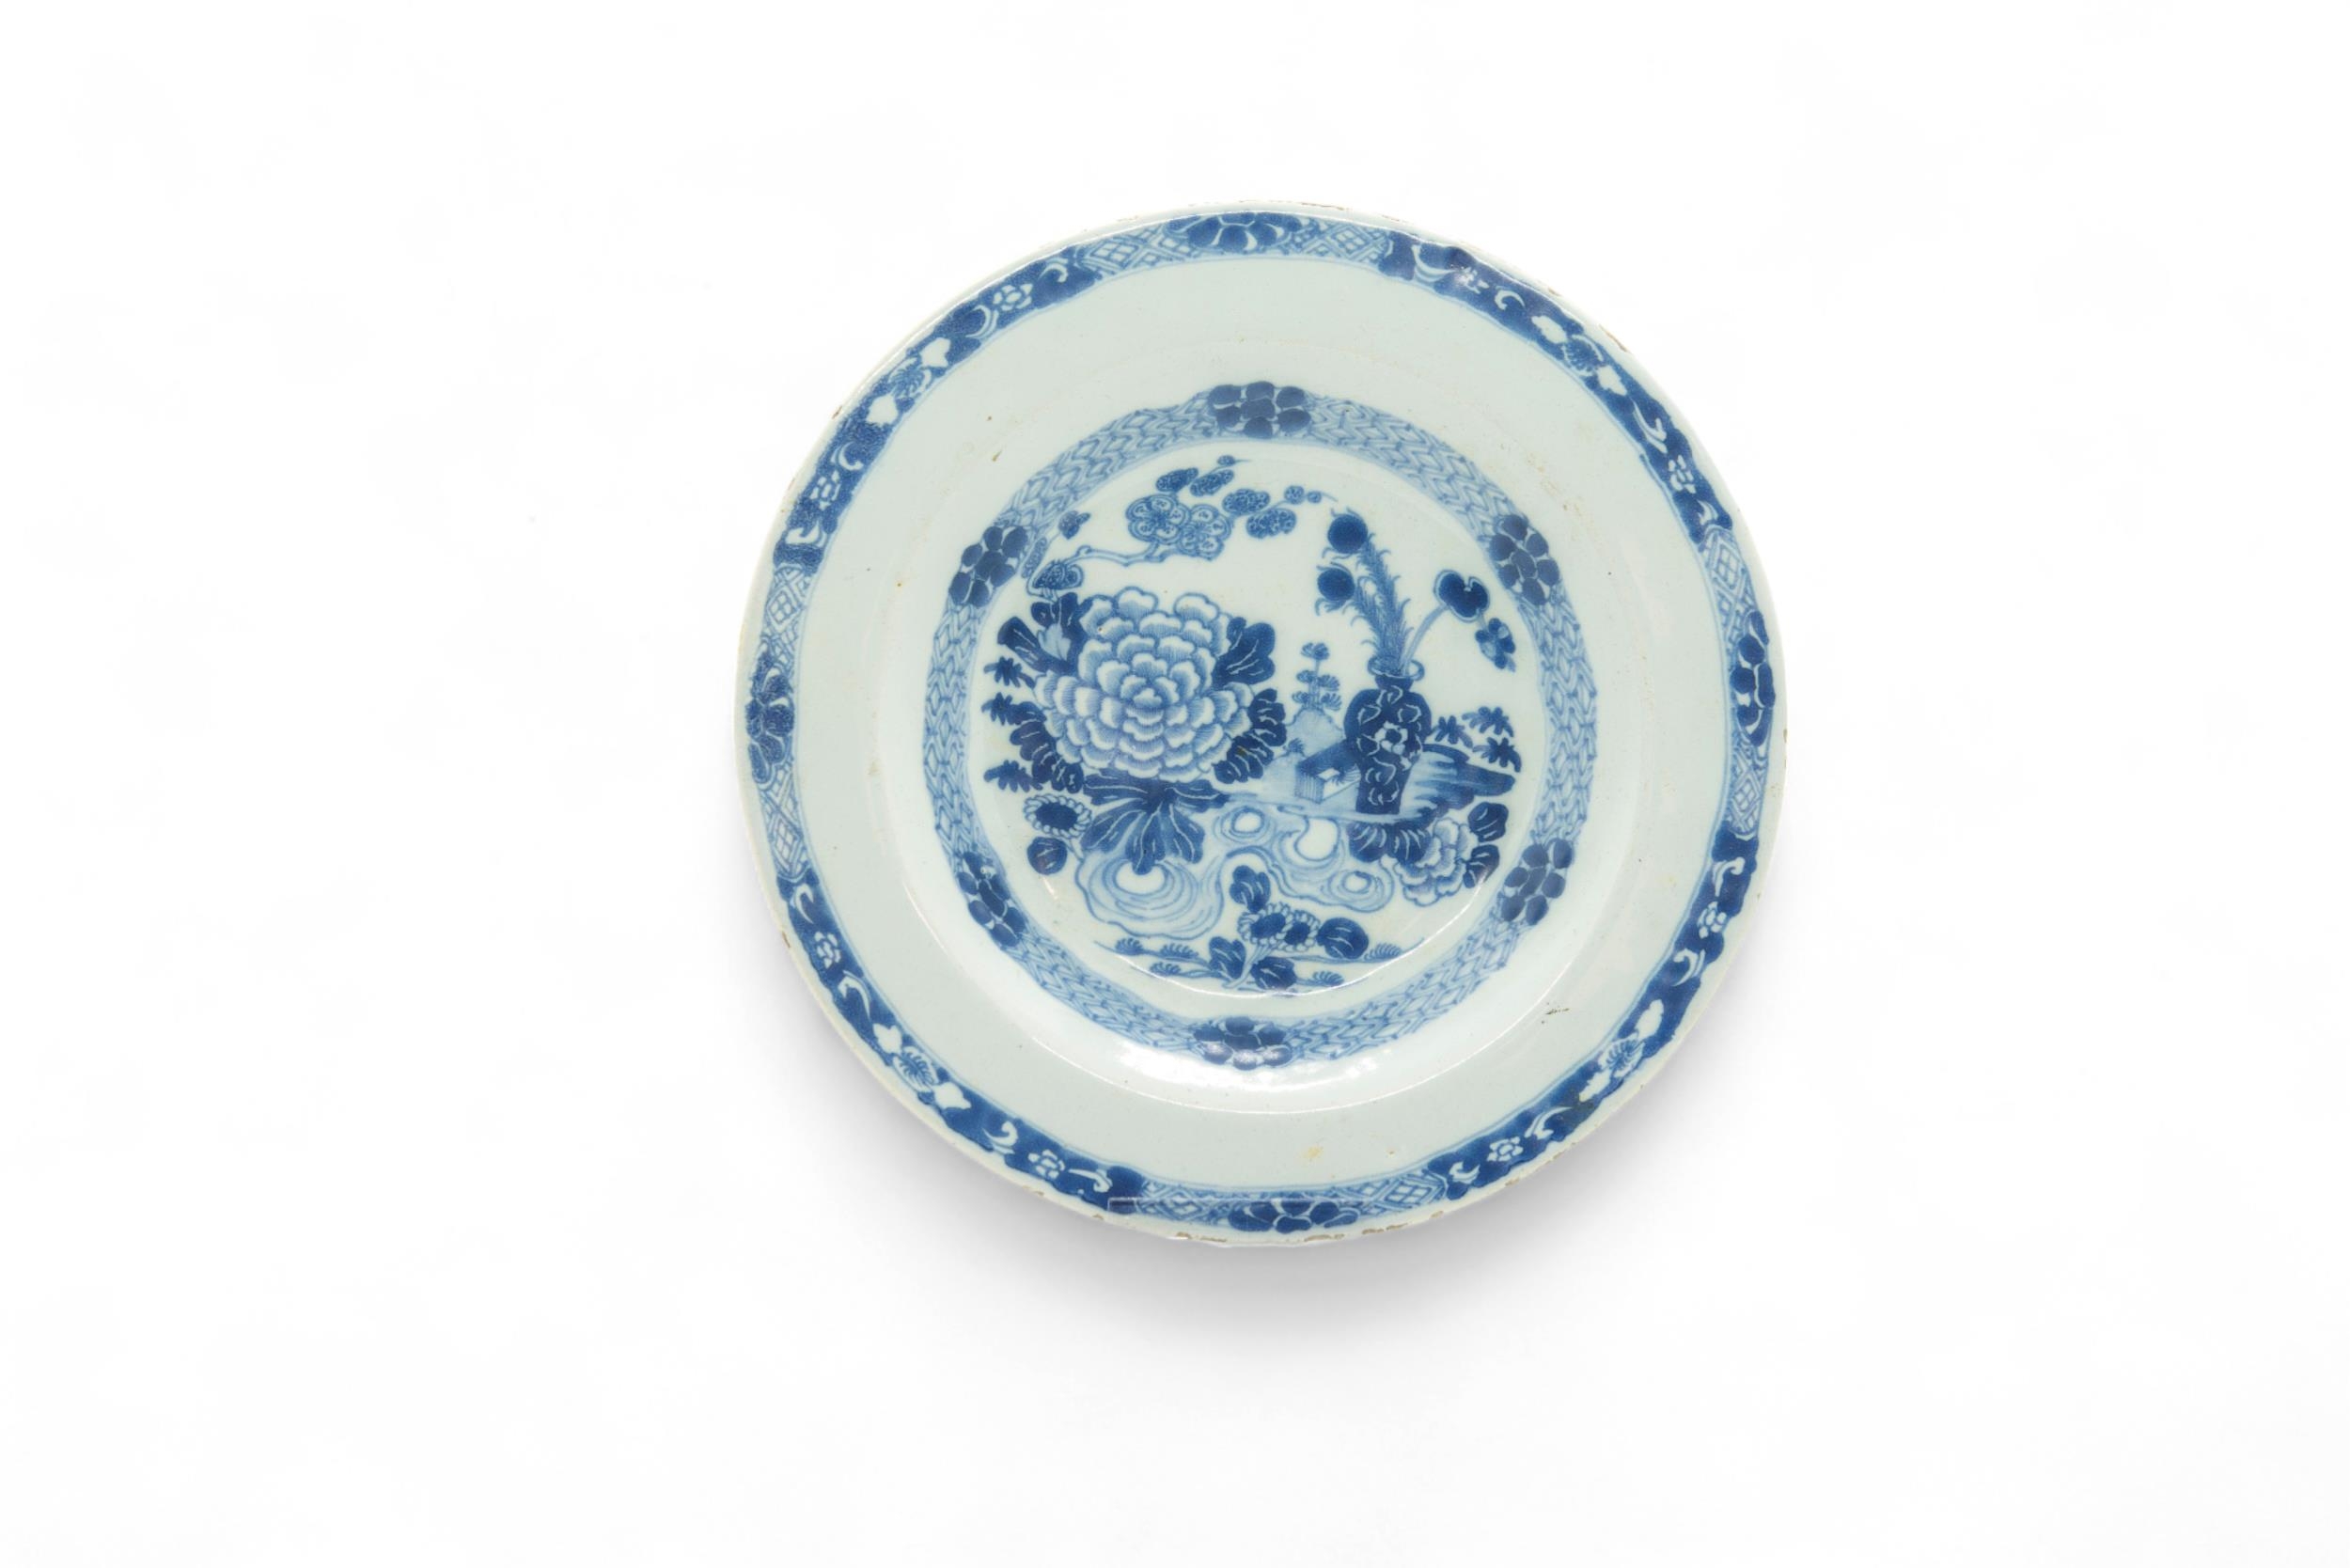 TEN DELFT PLATES 18th Century, including two with bianco sopro bianco decoration and one with a - Image 9 of 10